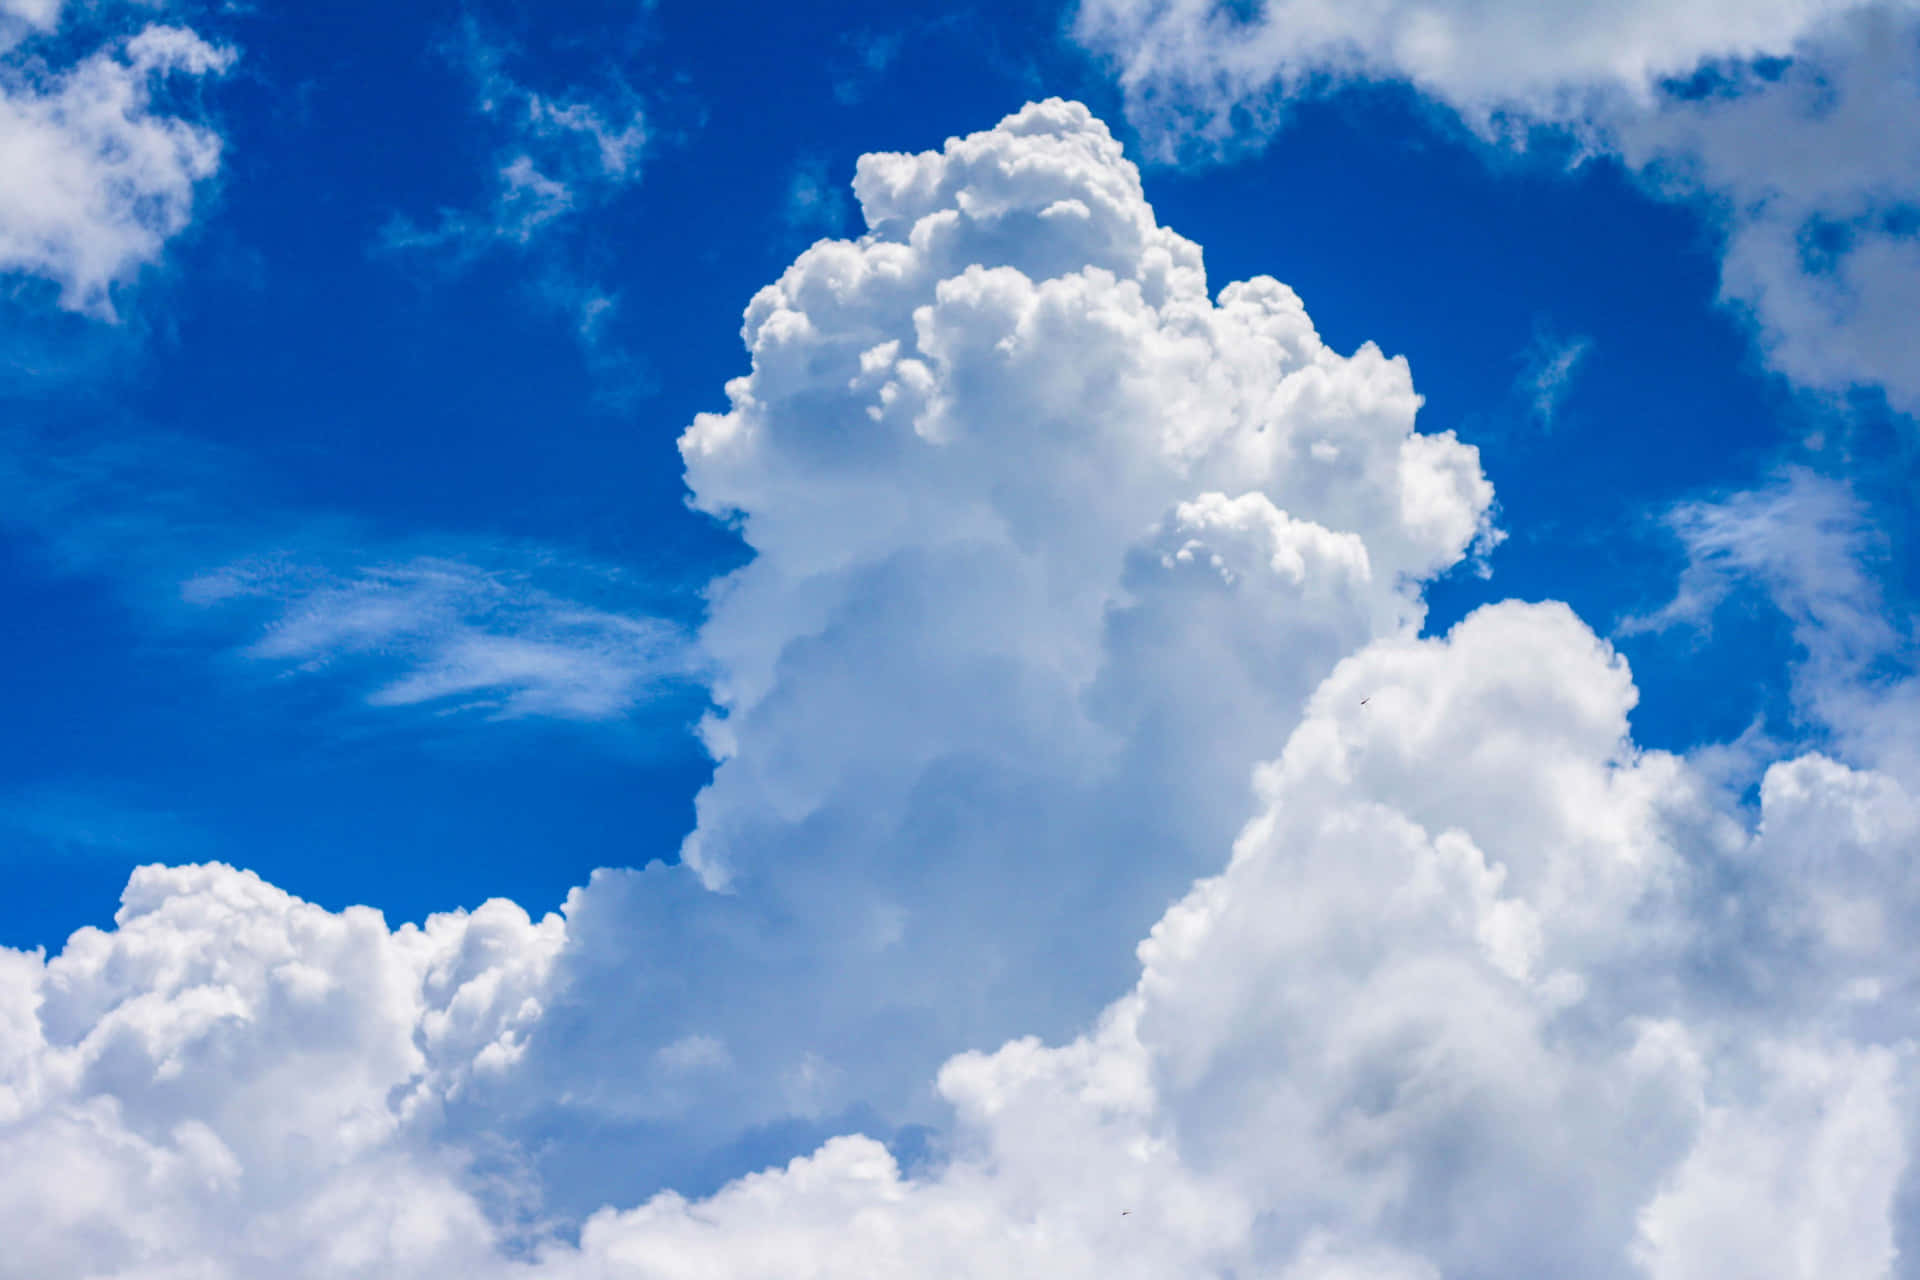 Free Clouds 4k Wallpaper Downloads, [100+] Clouds 4k Wallpapers for FREE |  